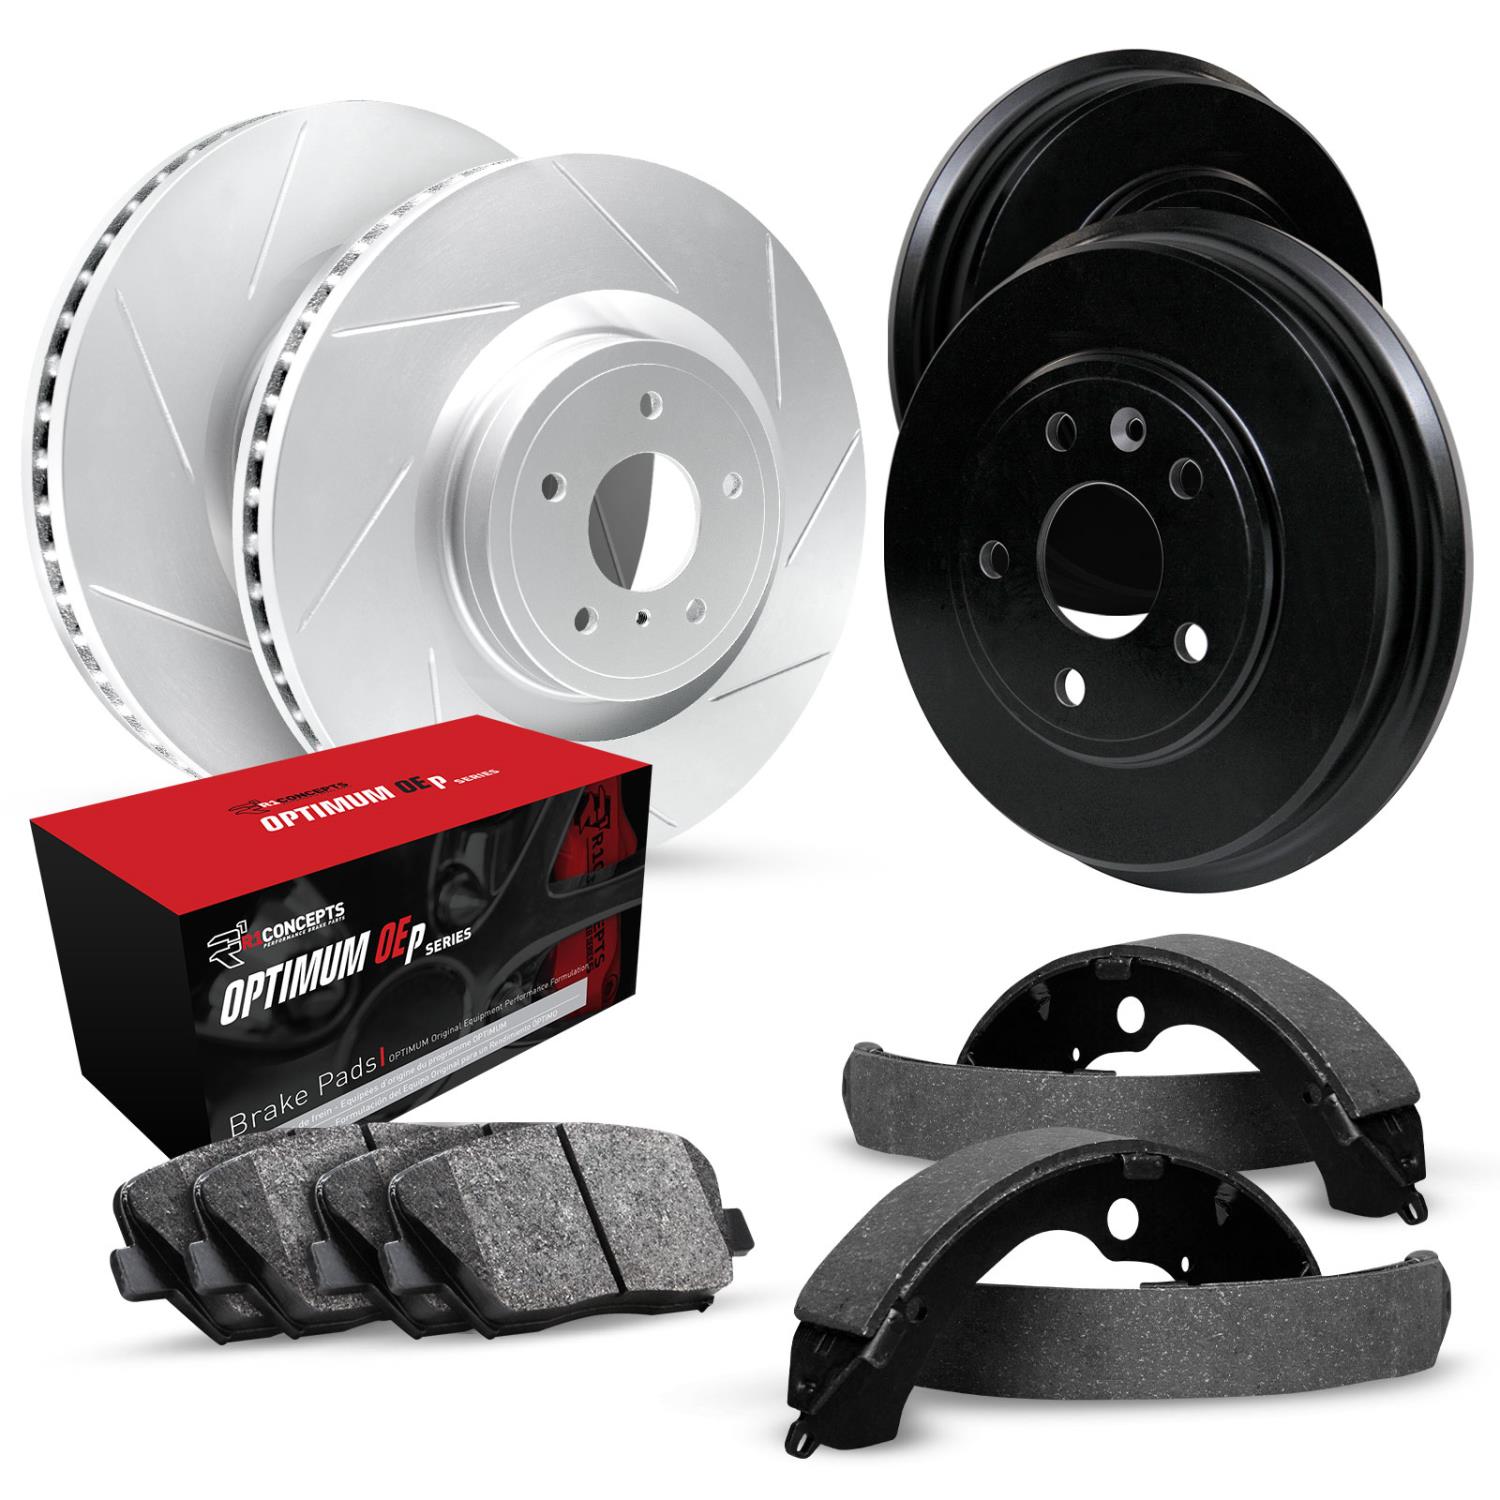 GEO-Carbon Slotted Brake Rotor & Drum Set w/Optimum OE Pads & Shoes, 1992-1996 Ford/Lincoln/Mercury/Mazda